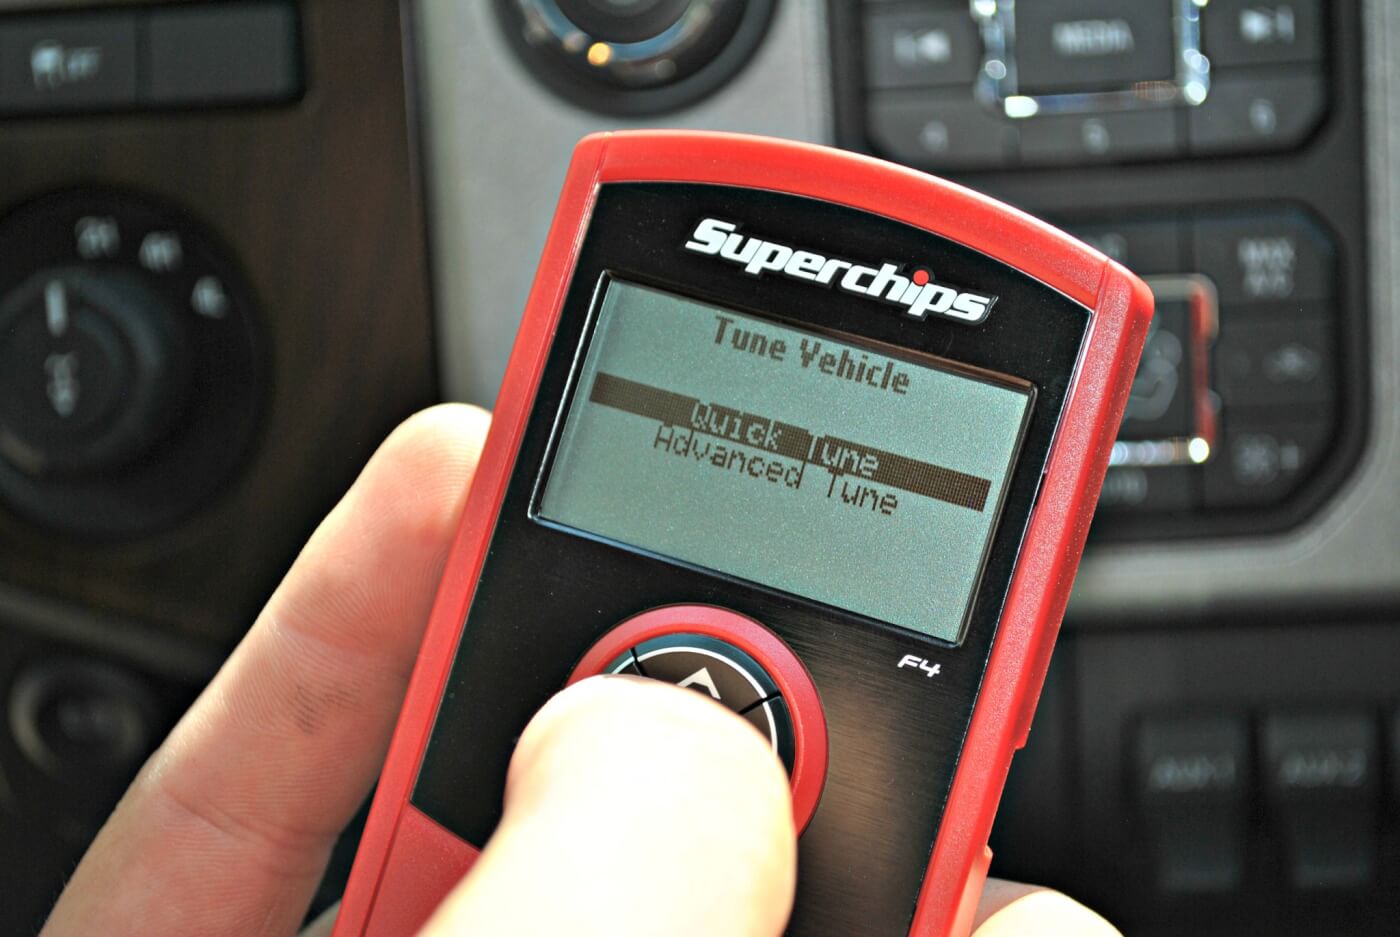 2. Like their earlier model handheld tuners, the Superchips F4 is a user friendly tuner that offers complete plug ’n’ play installation—no tools, no wiring, no opening the hood. By simply plugging into the OBD-II port under the dash, the F4 accesses the truck's on board computer. It can save the factory file and replace it with Superchips' own files for Mileage, Towing or Performance.